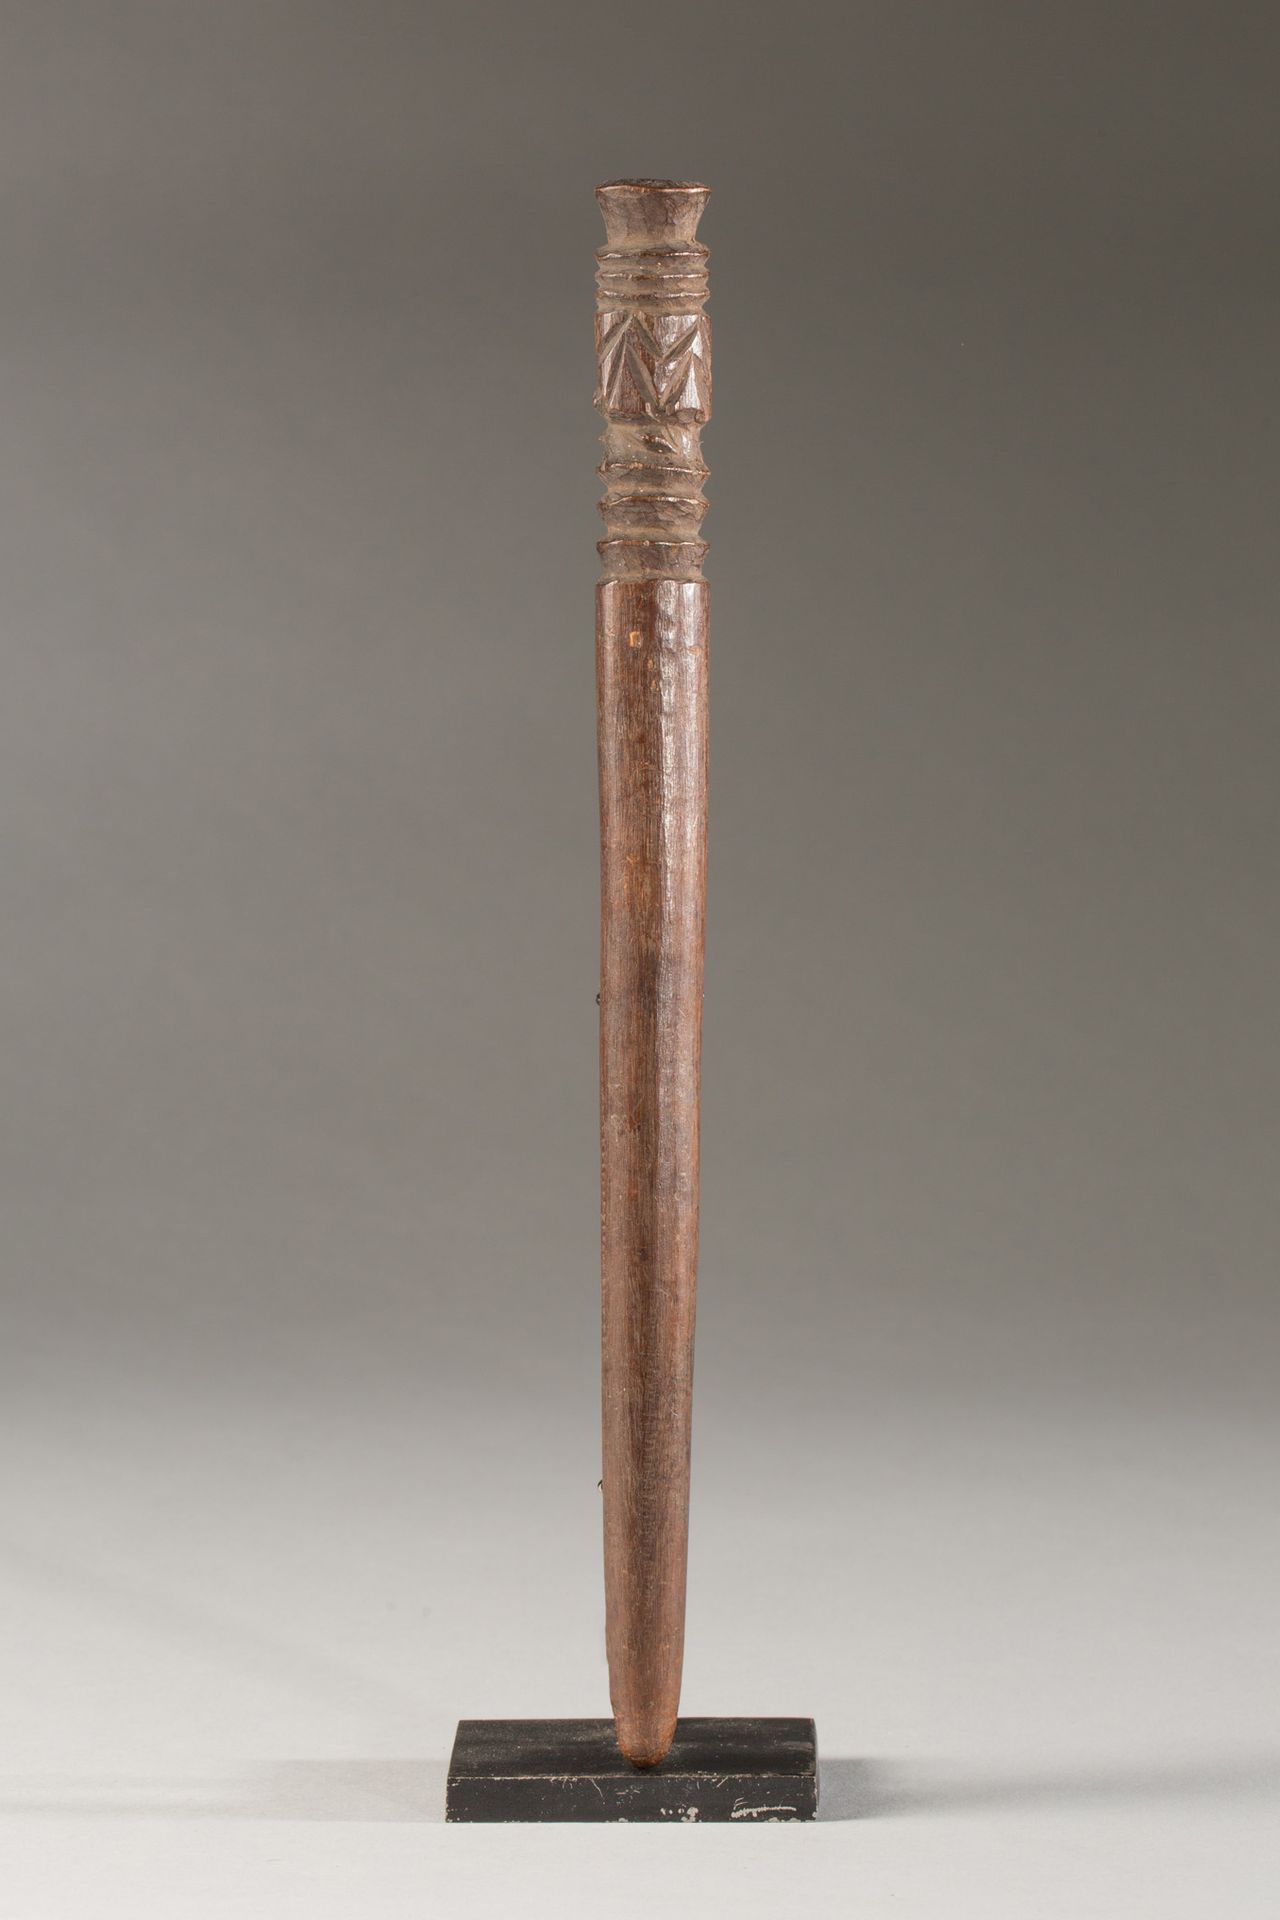 Peuple NUpe Sculptured Dance Stick, Nupe People, Nigeria, 1930s to 1940s - 28,5x&hellip;